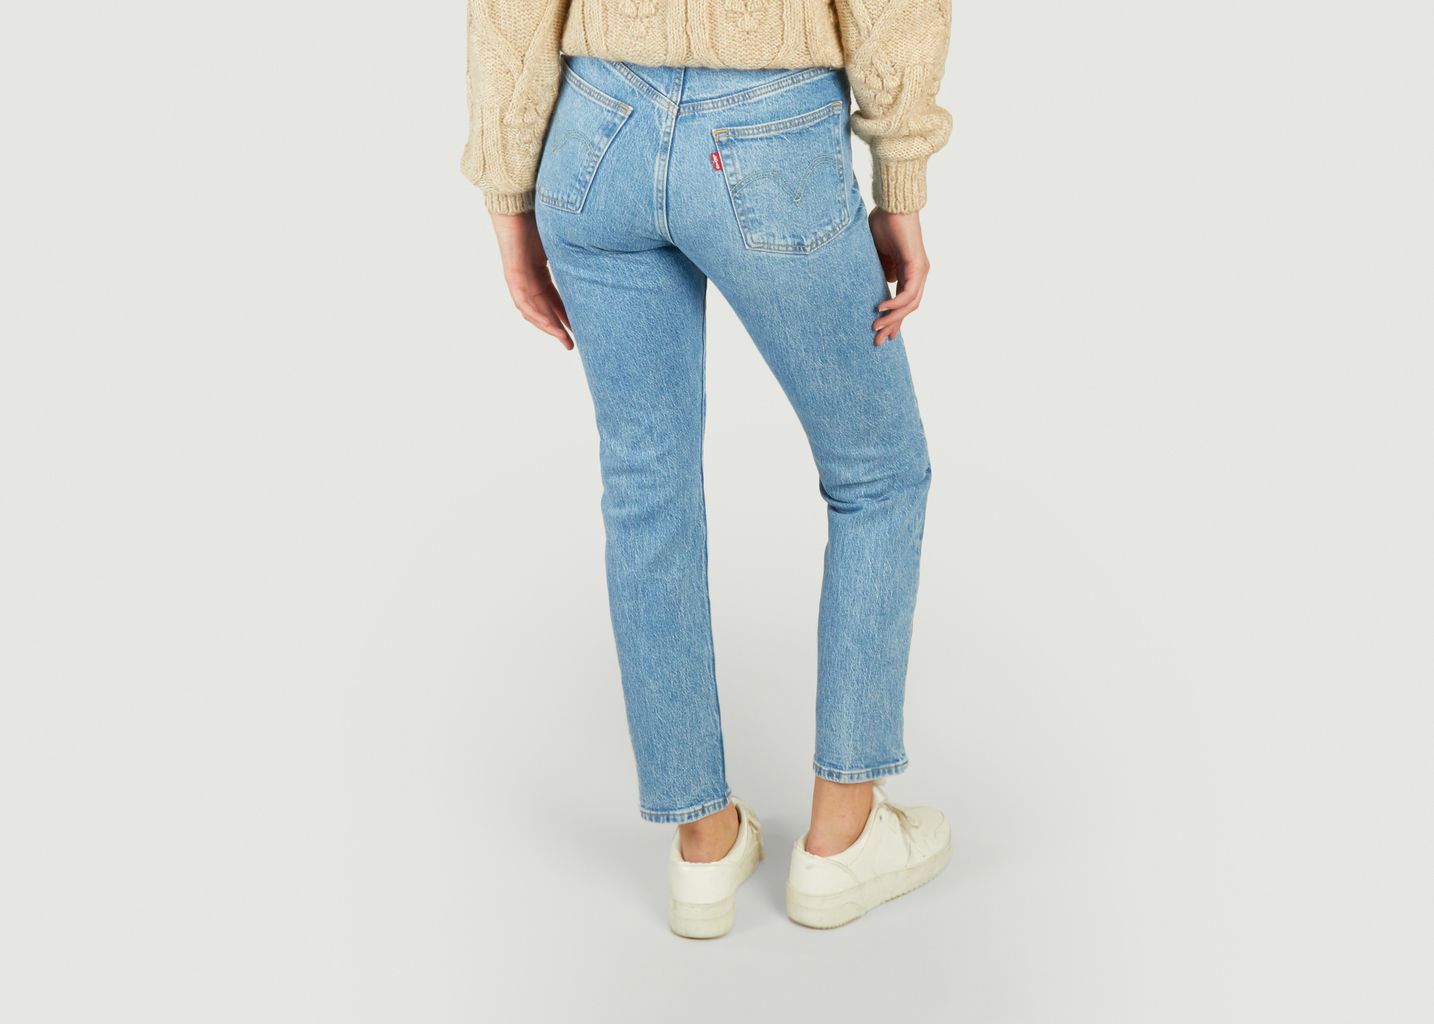 Jeans 501 - Levi's Red Tab